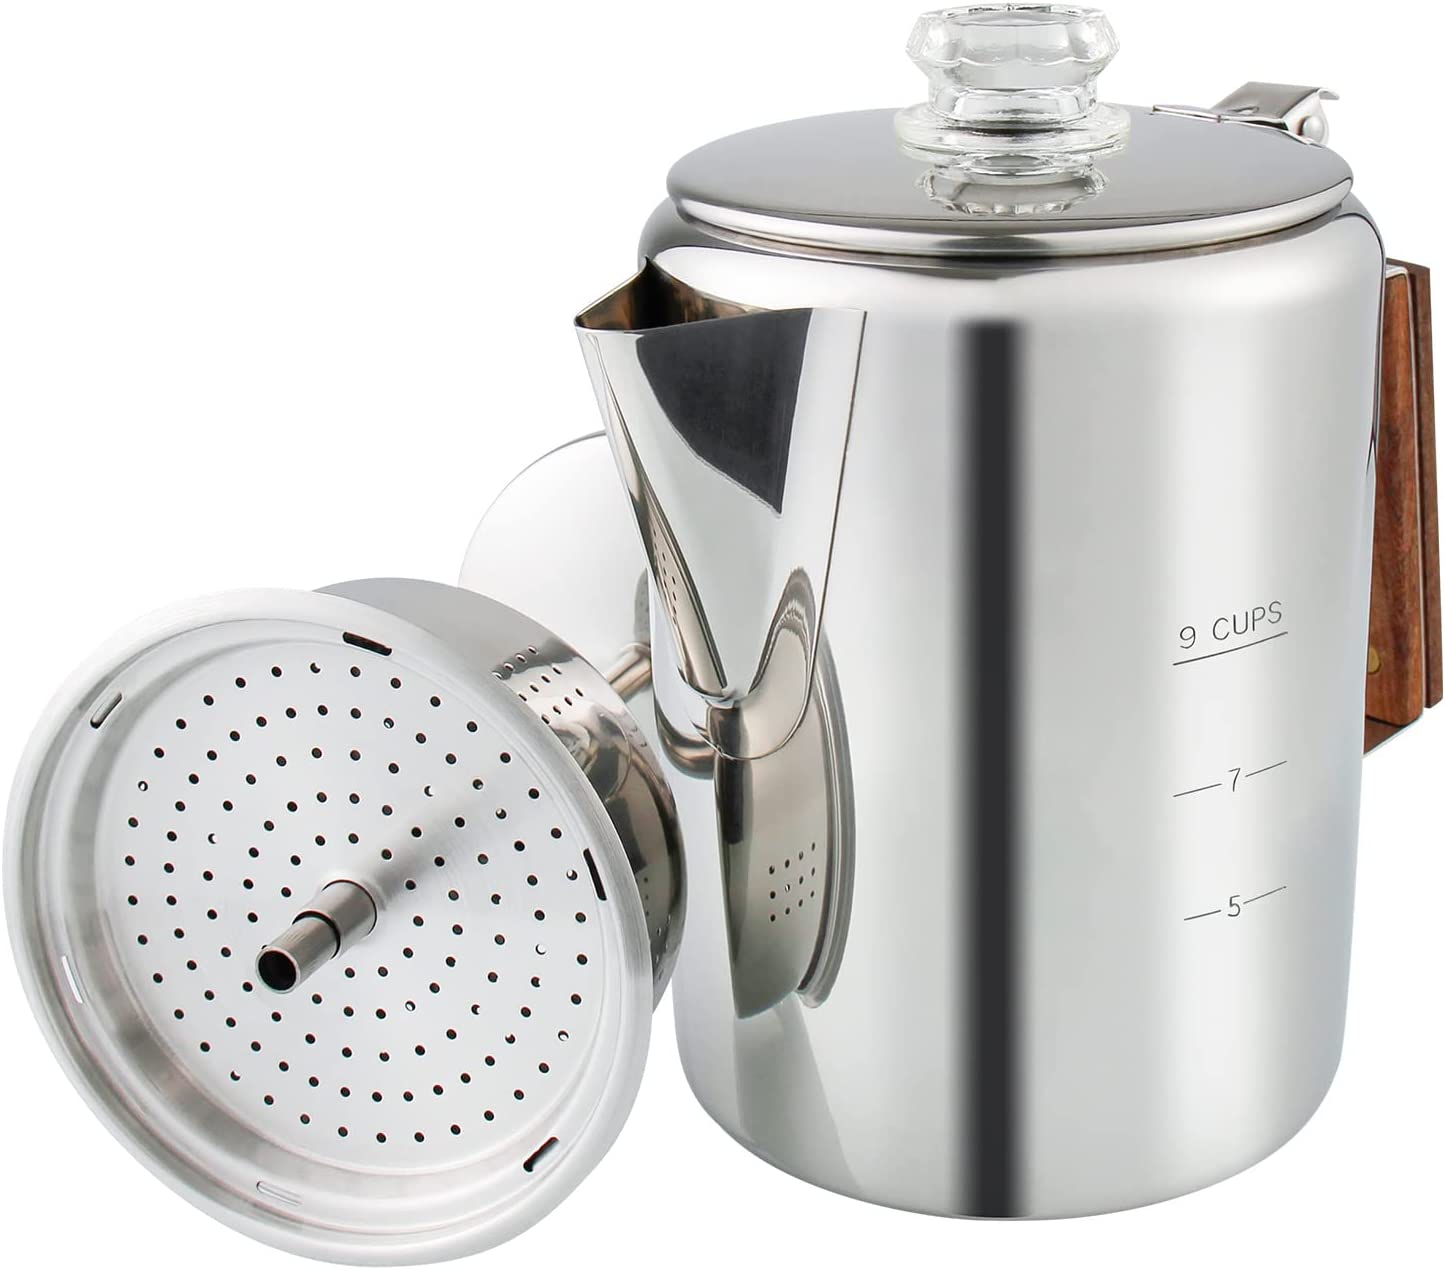  Tops 55705 Rapid Brew Stovetop Coffee Percolator, Stainless  Steel, 2-12 Cup: Stovetop Espresso Pots: Home & Kitchen